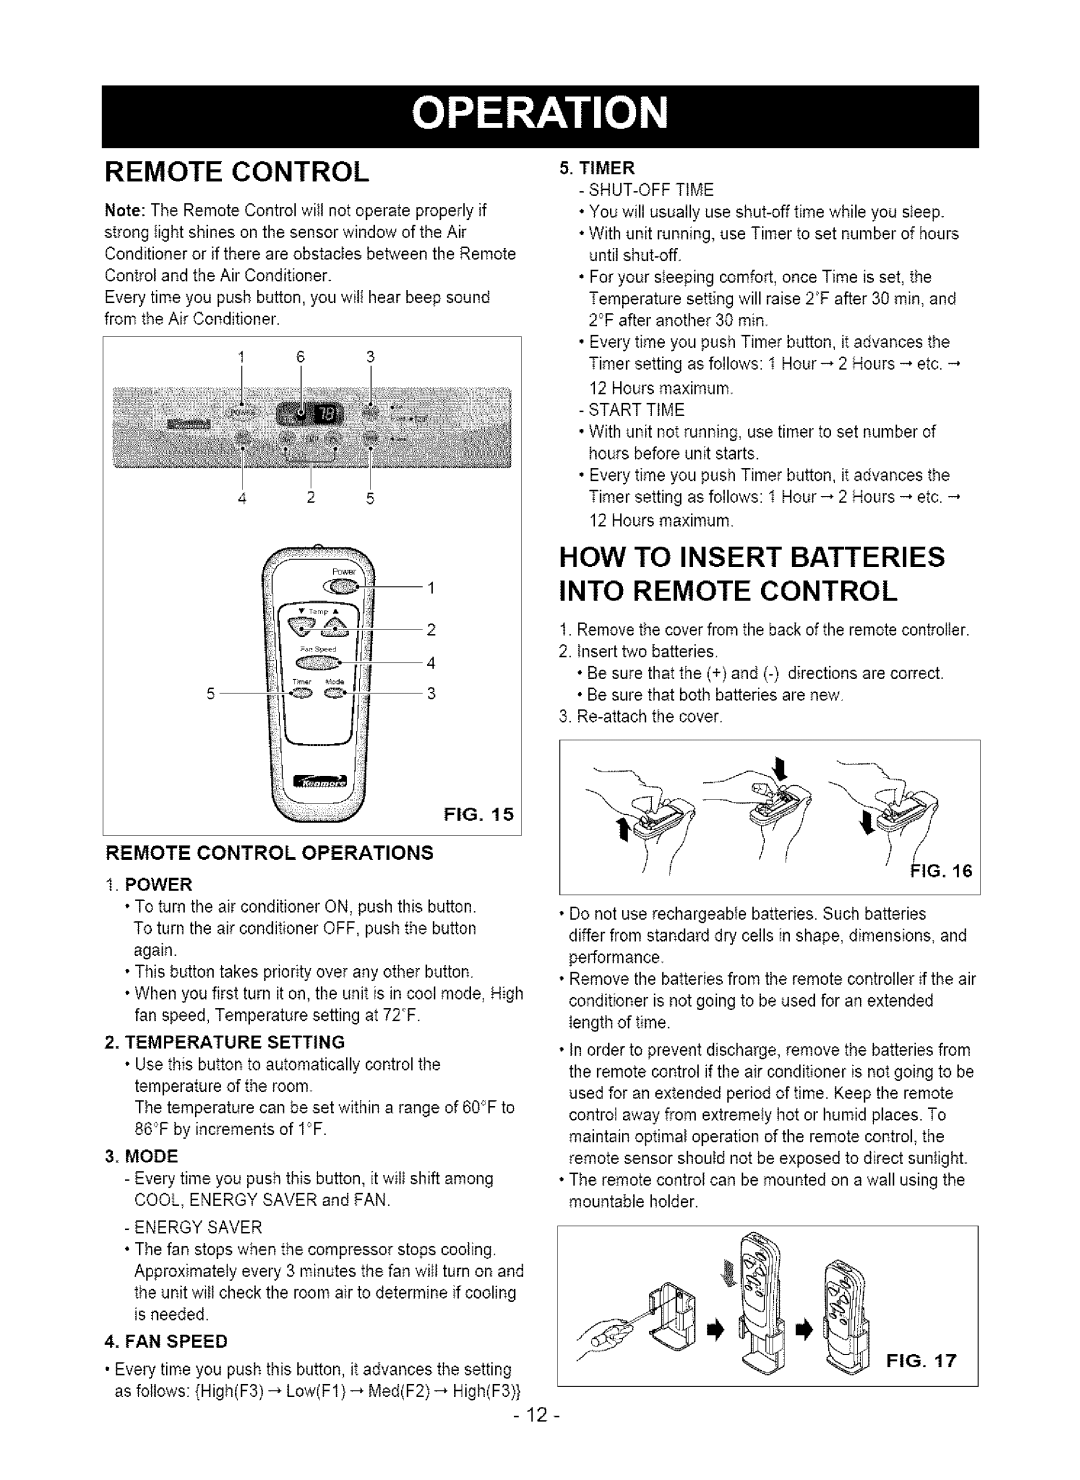 Kenmore 580. 75063 How To Insert Batteries, Into Remote Control, Remote Control Operations, 5, TIMER, Power, Mode 